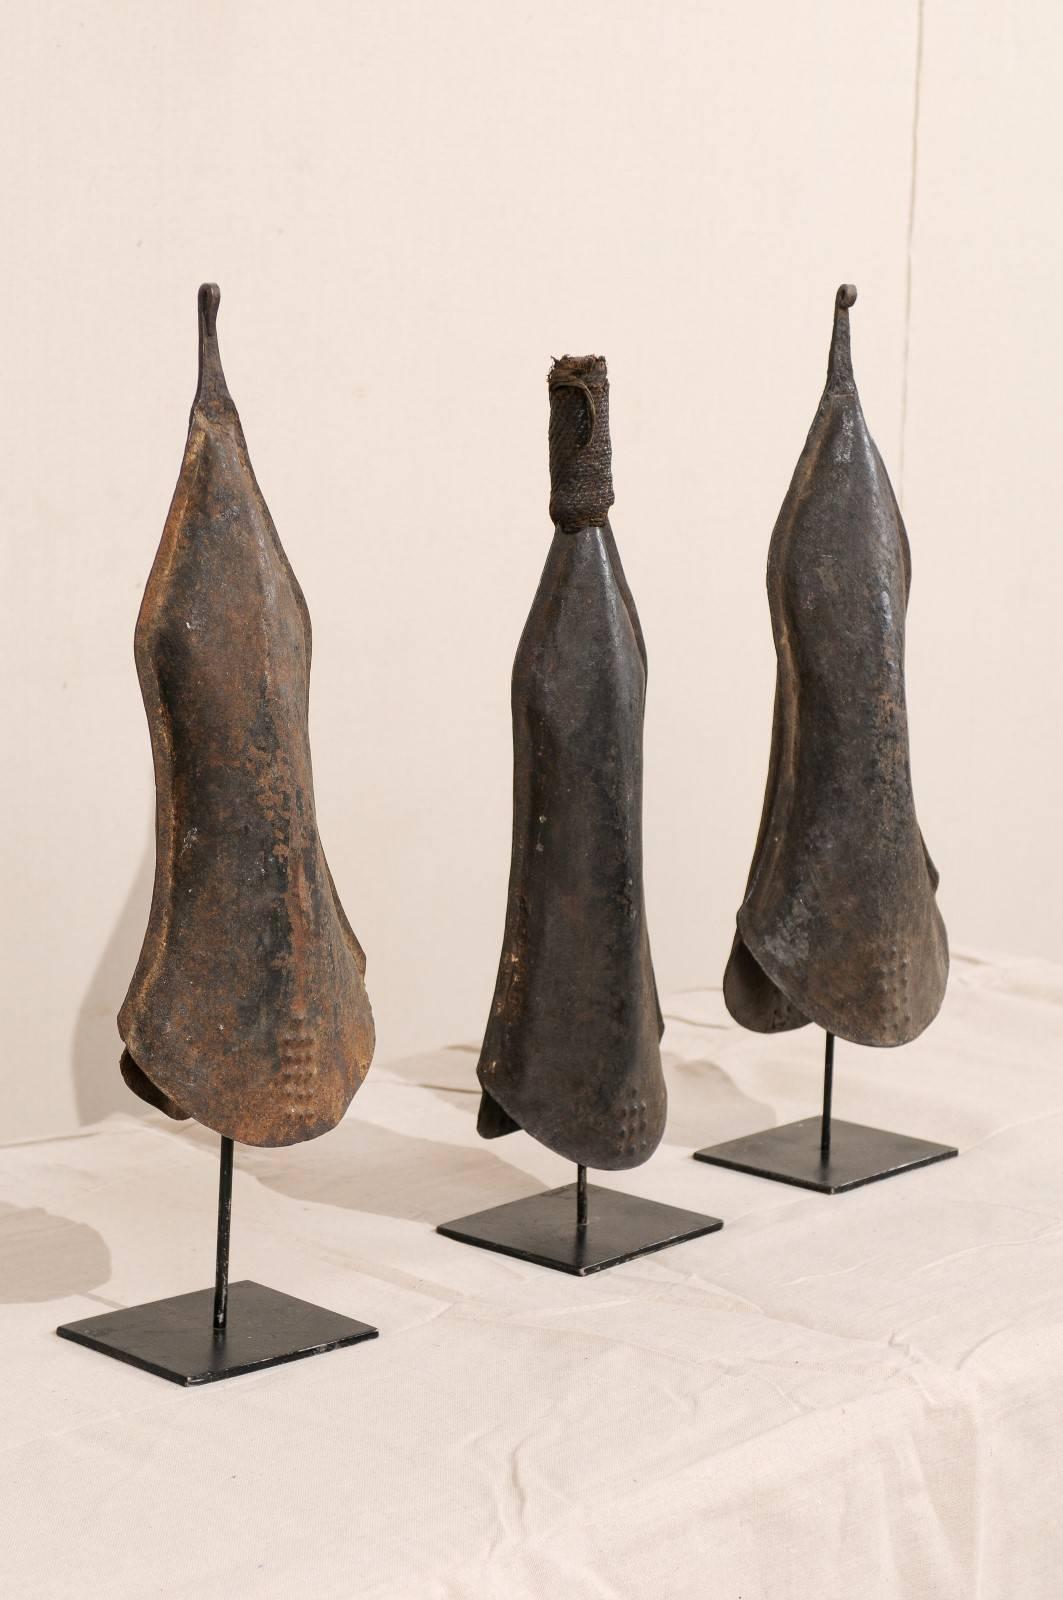 Congolese Set of Three African Hand-Forged Iron Bell Currencies on Custom Iron Stands